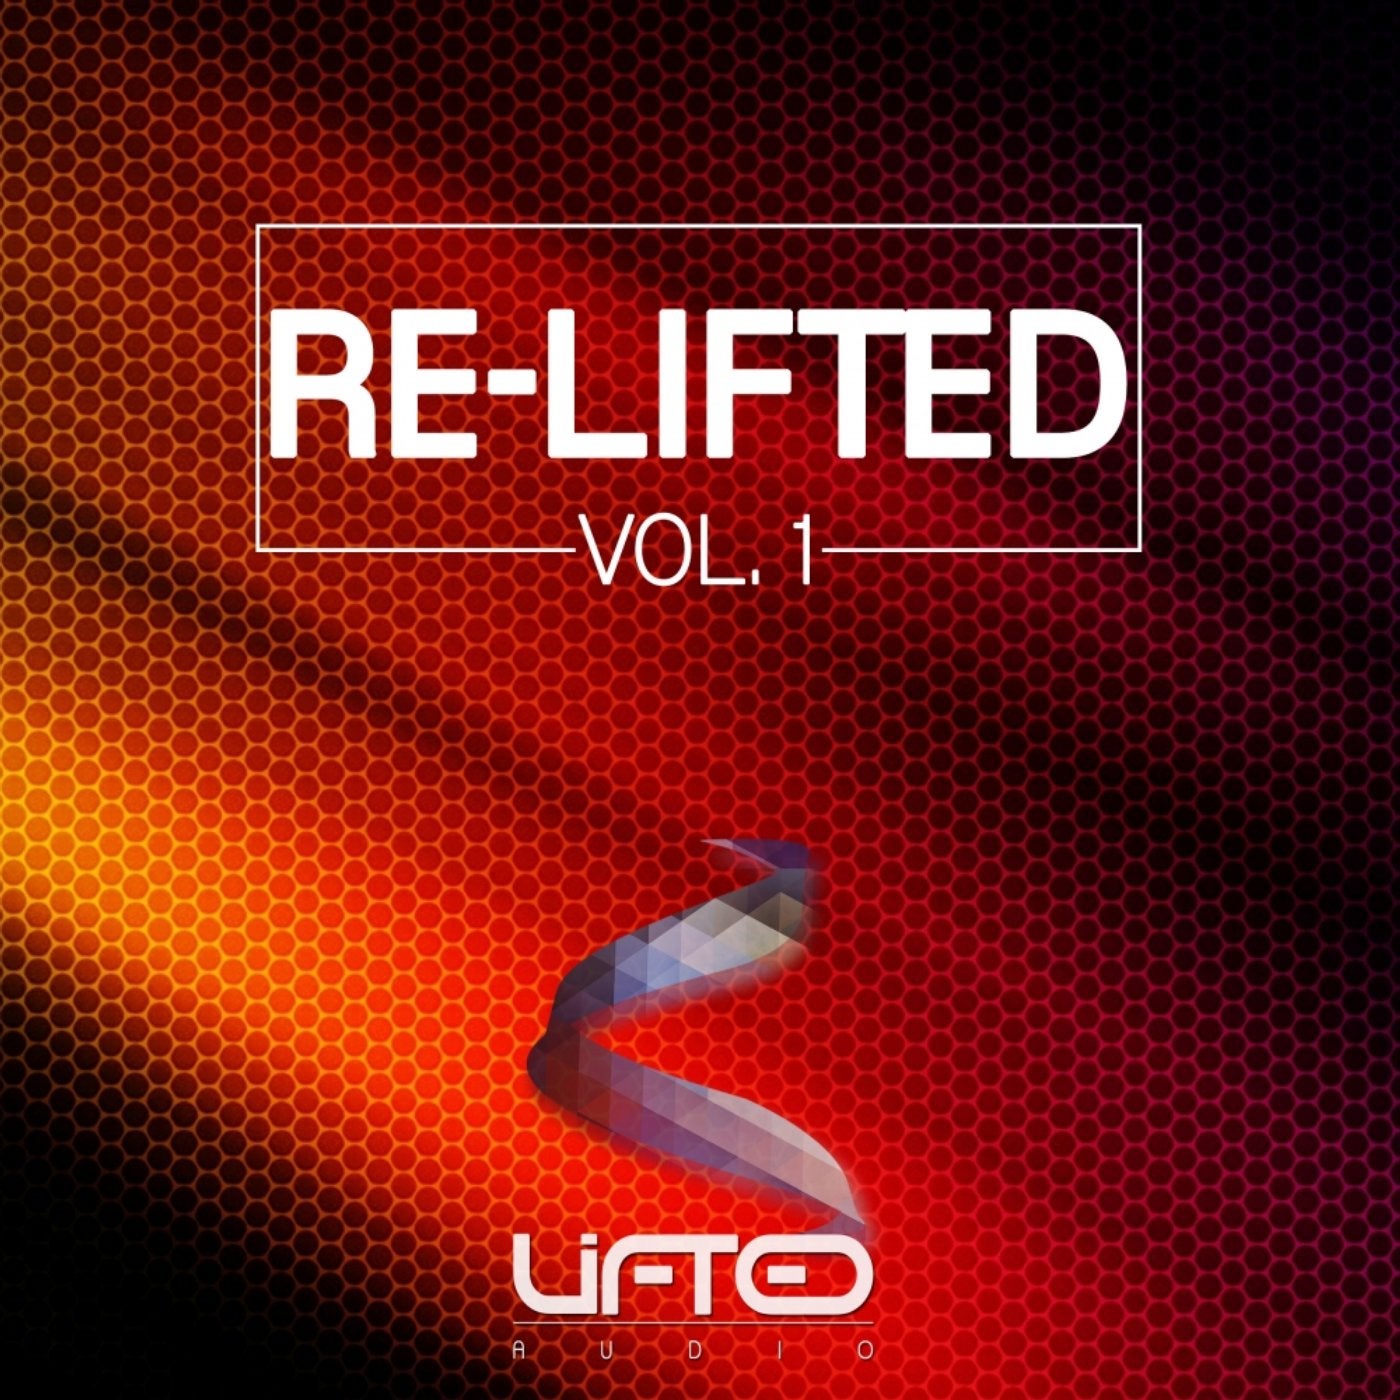 Re-Lifted Vol. 1